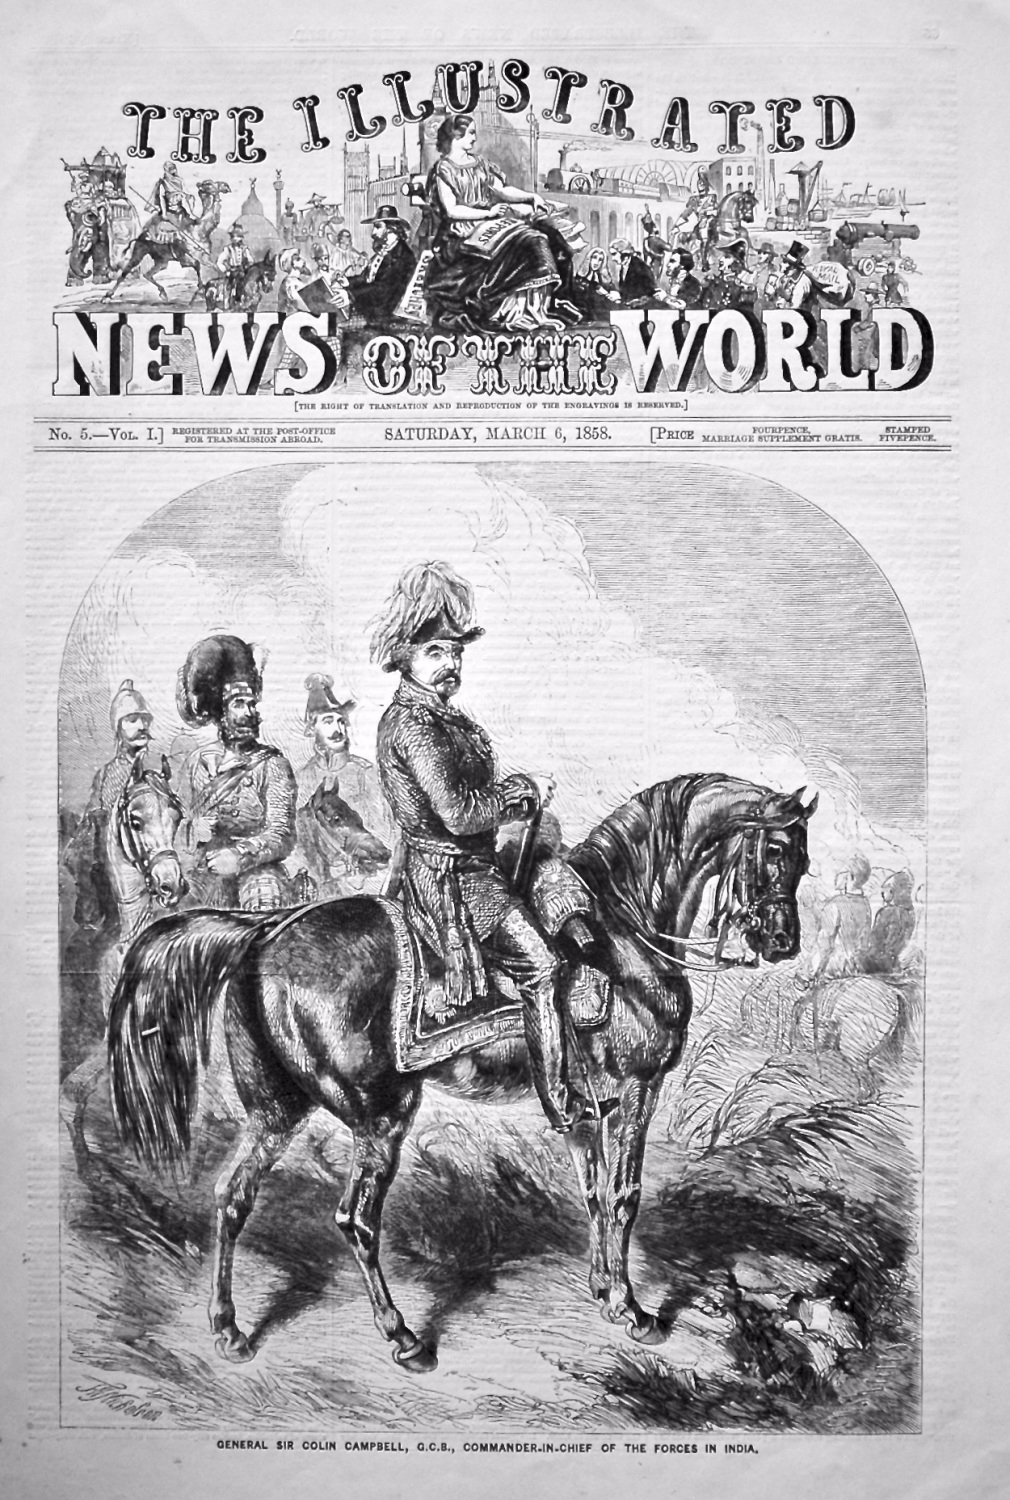 The Illustrated News of the World,  March 6th, 1858.